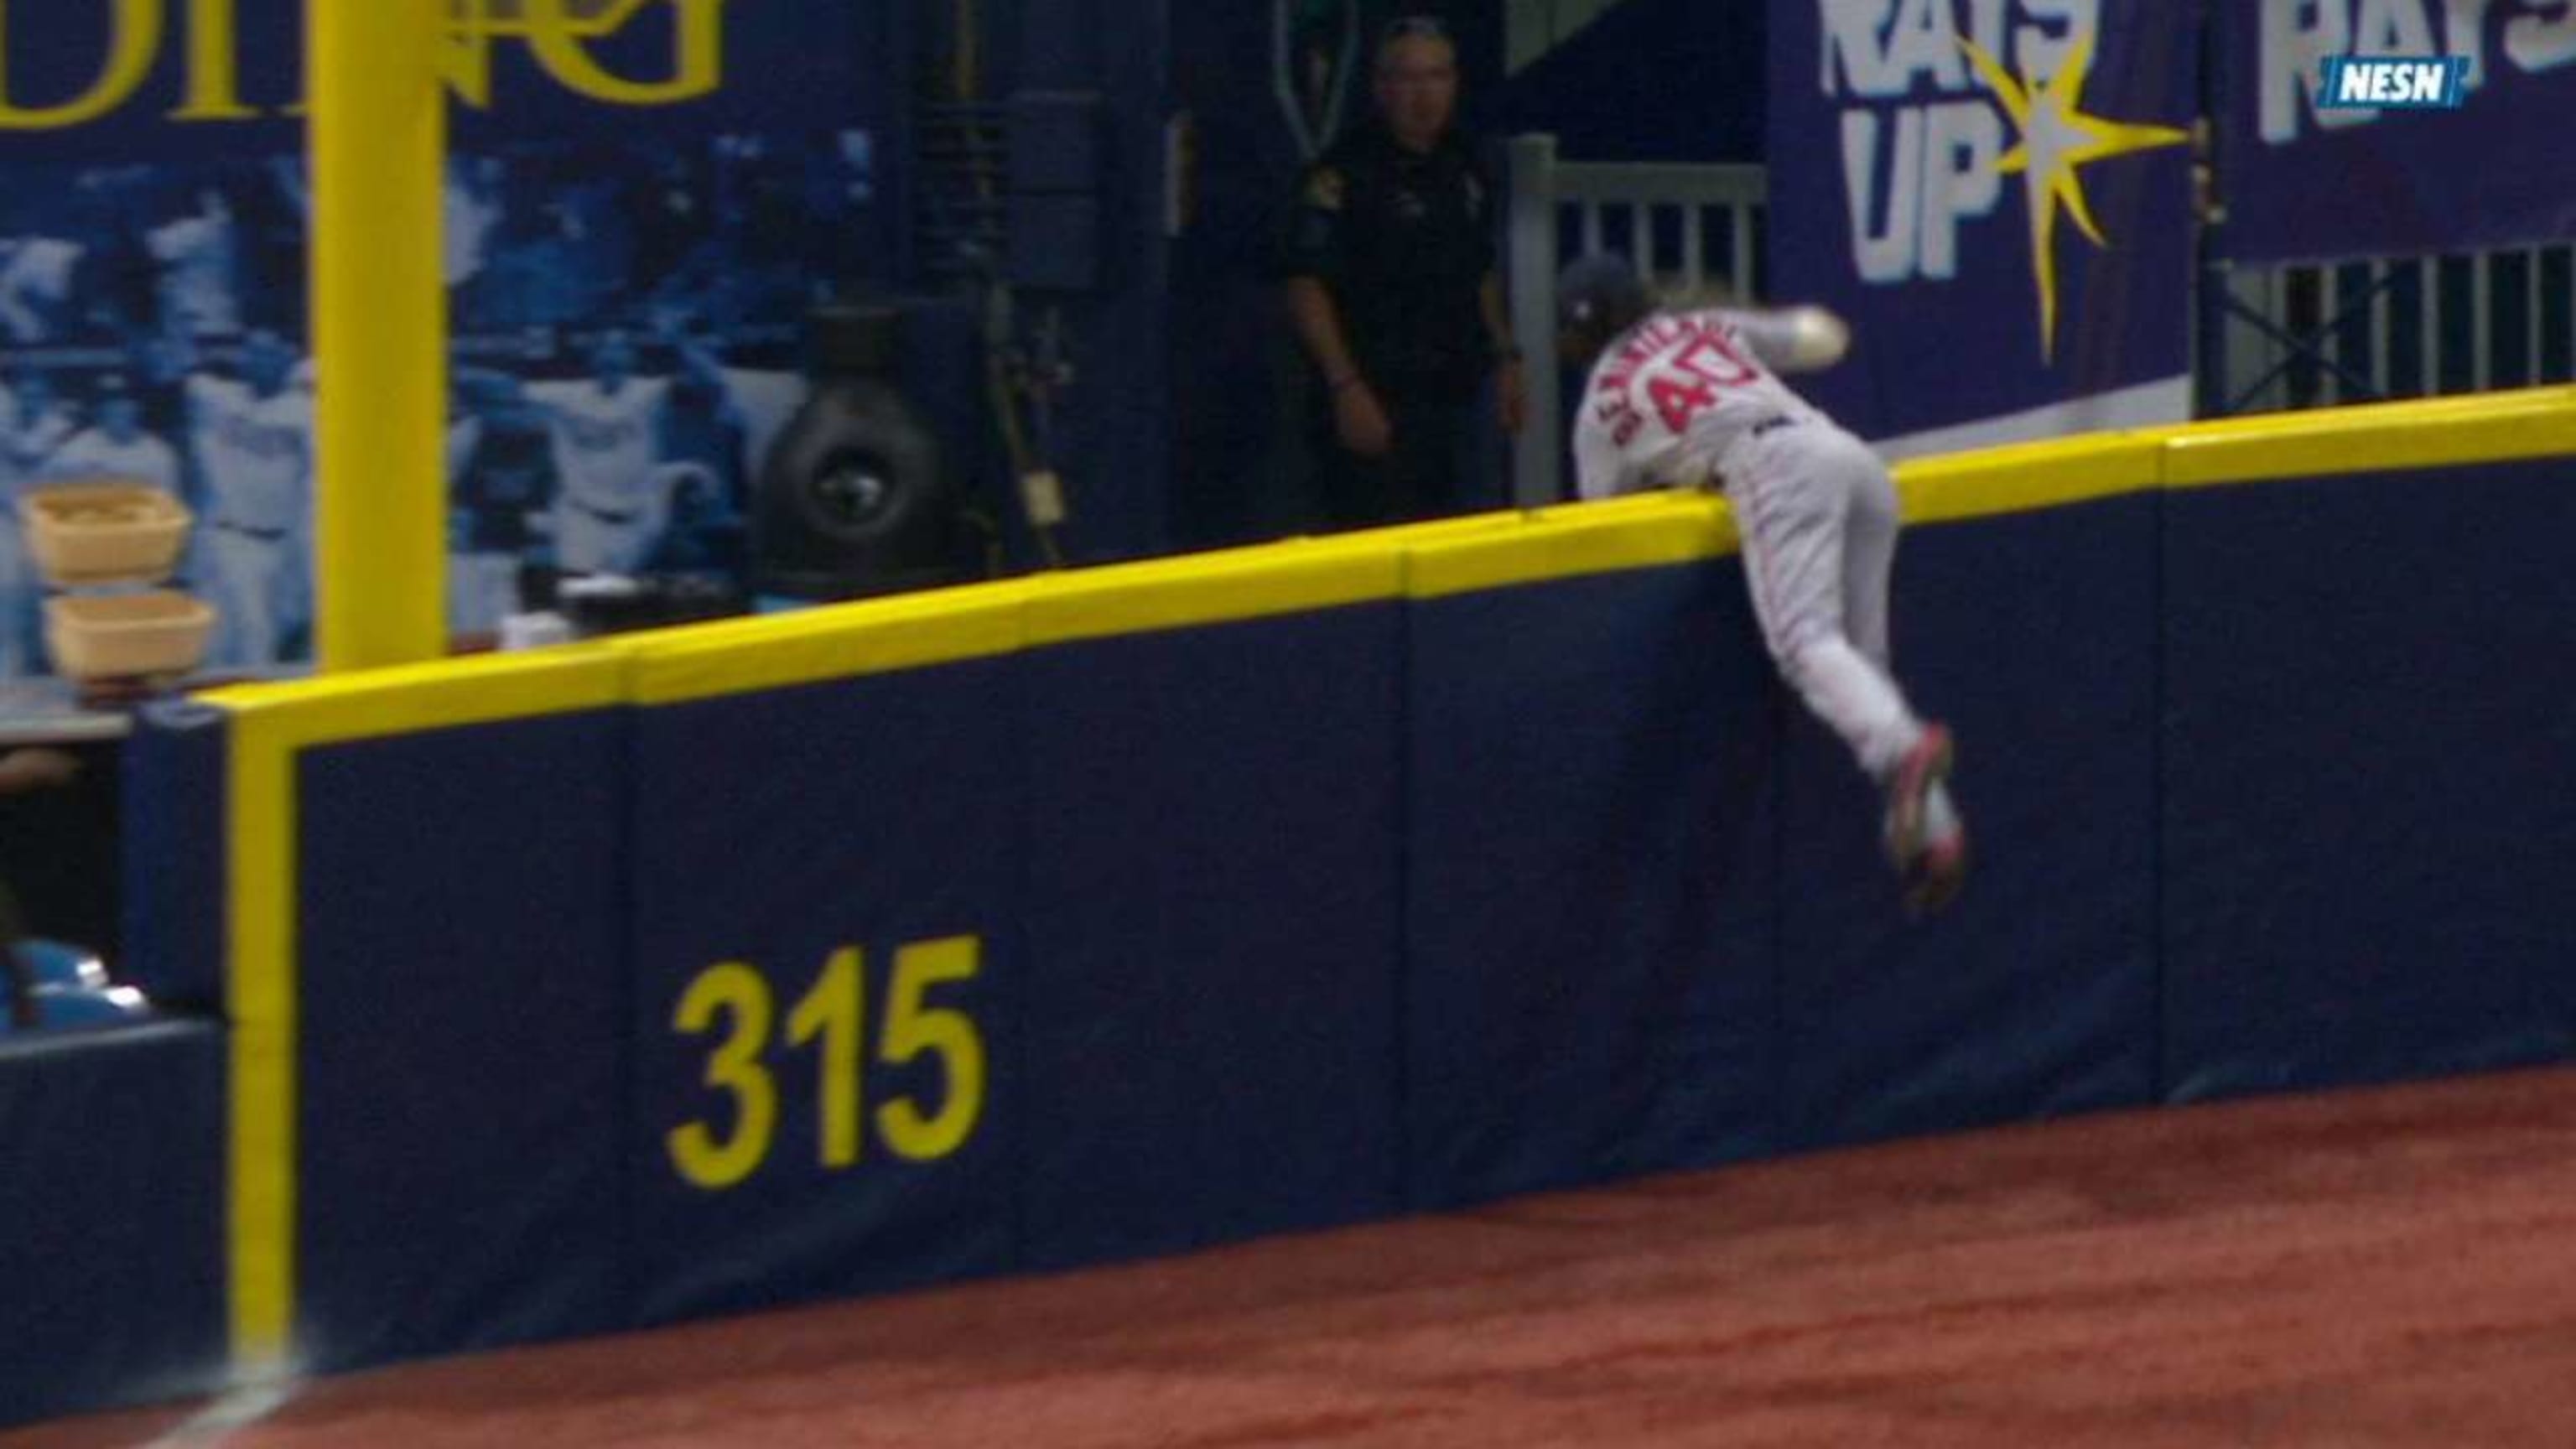 WHAT A CATCH BY ANDREW BENINTENDI!